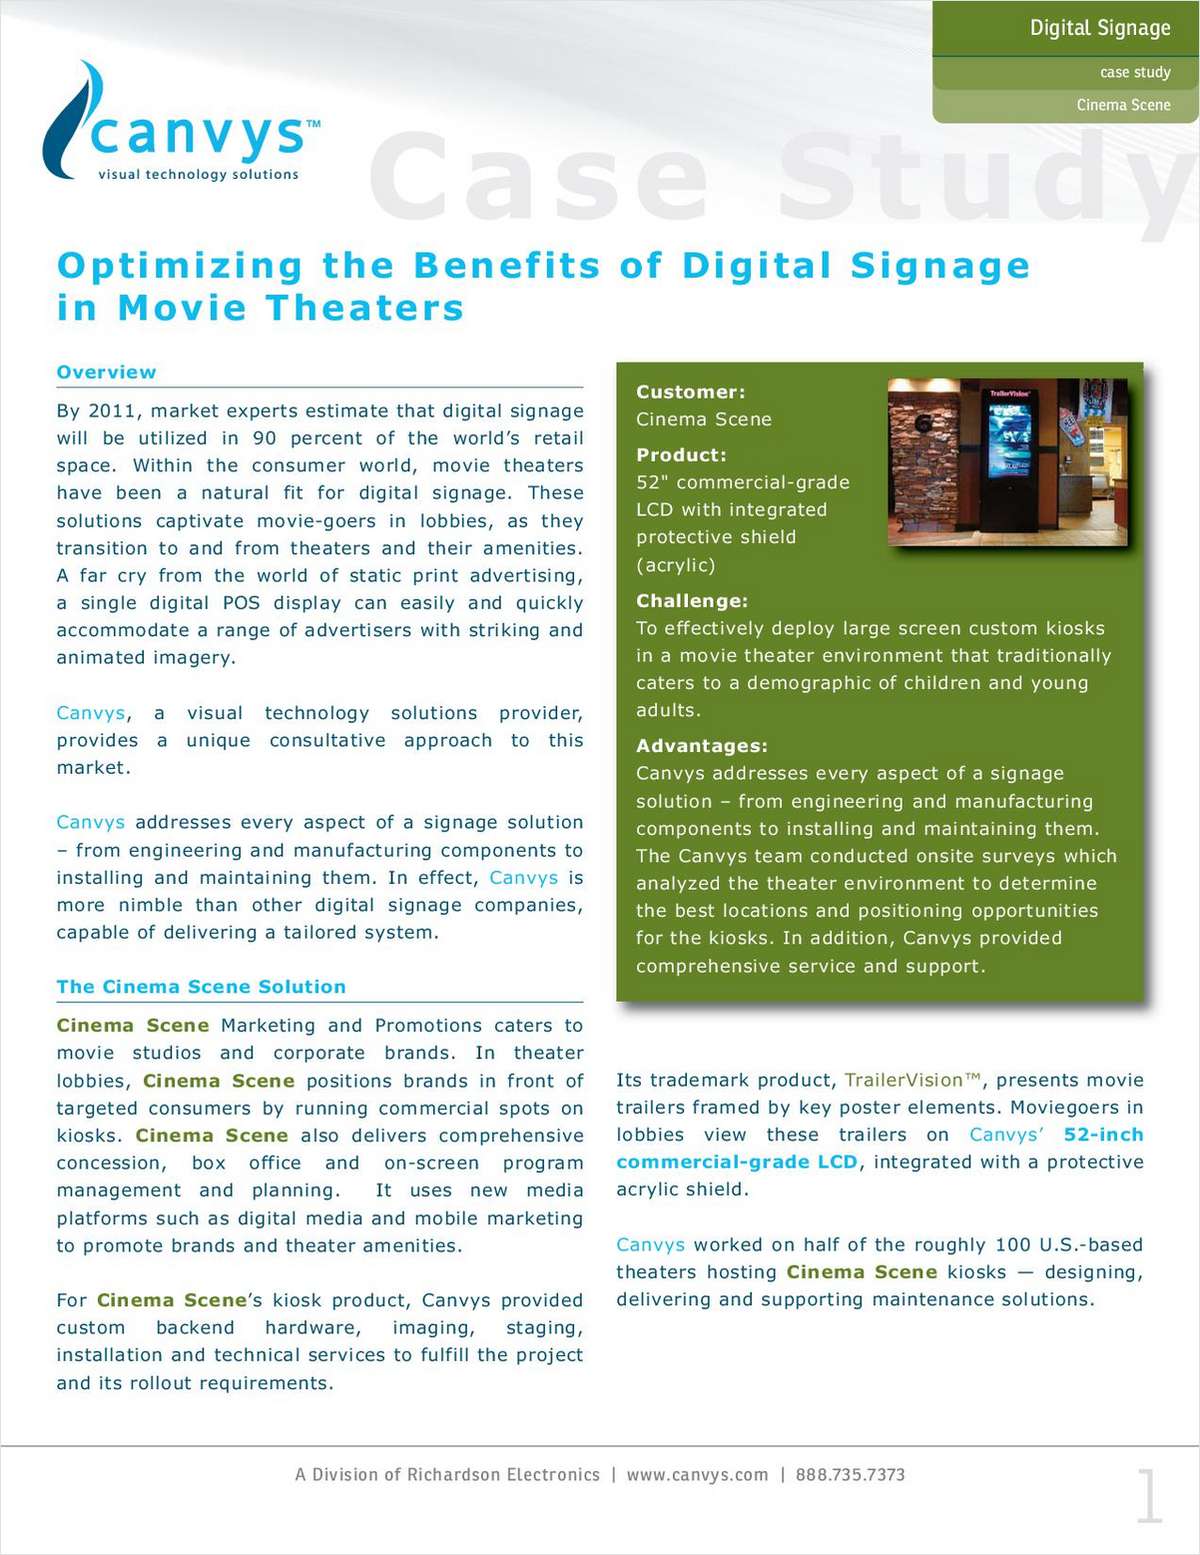 Canvys Case Study: Optimizing the Benefits of Digital Signage in Movie Theaters